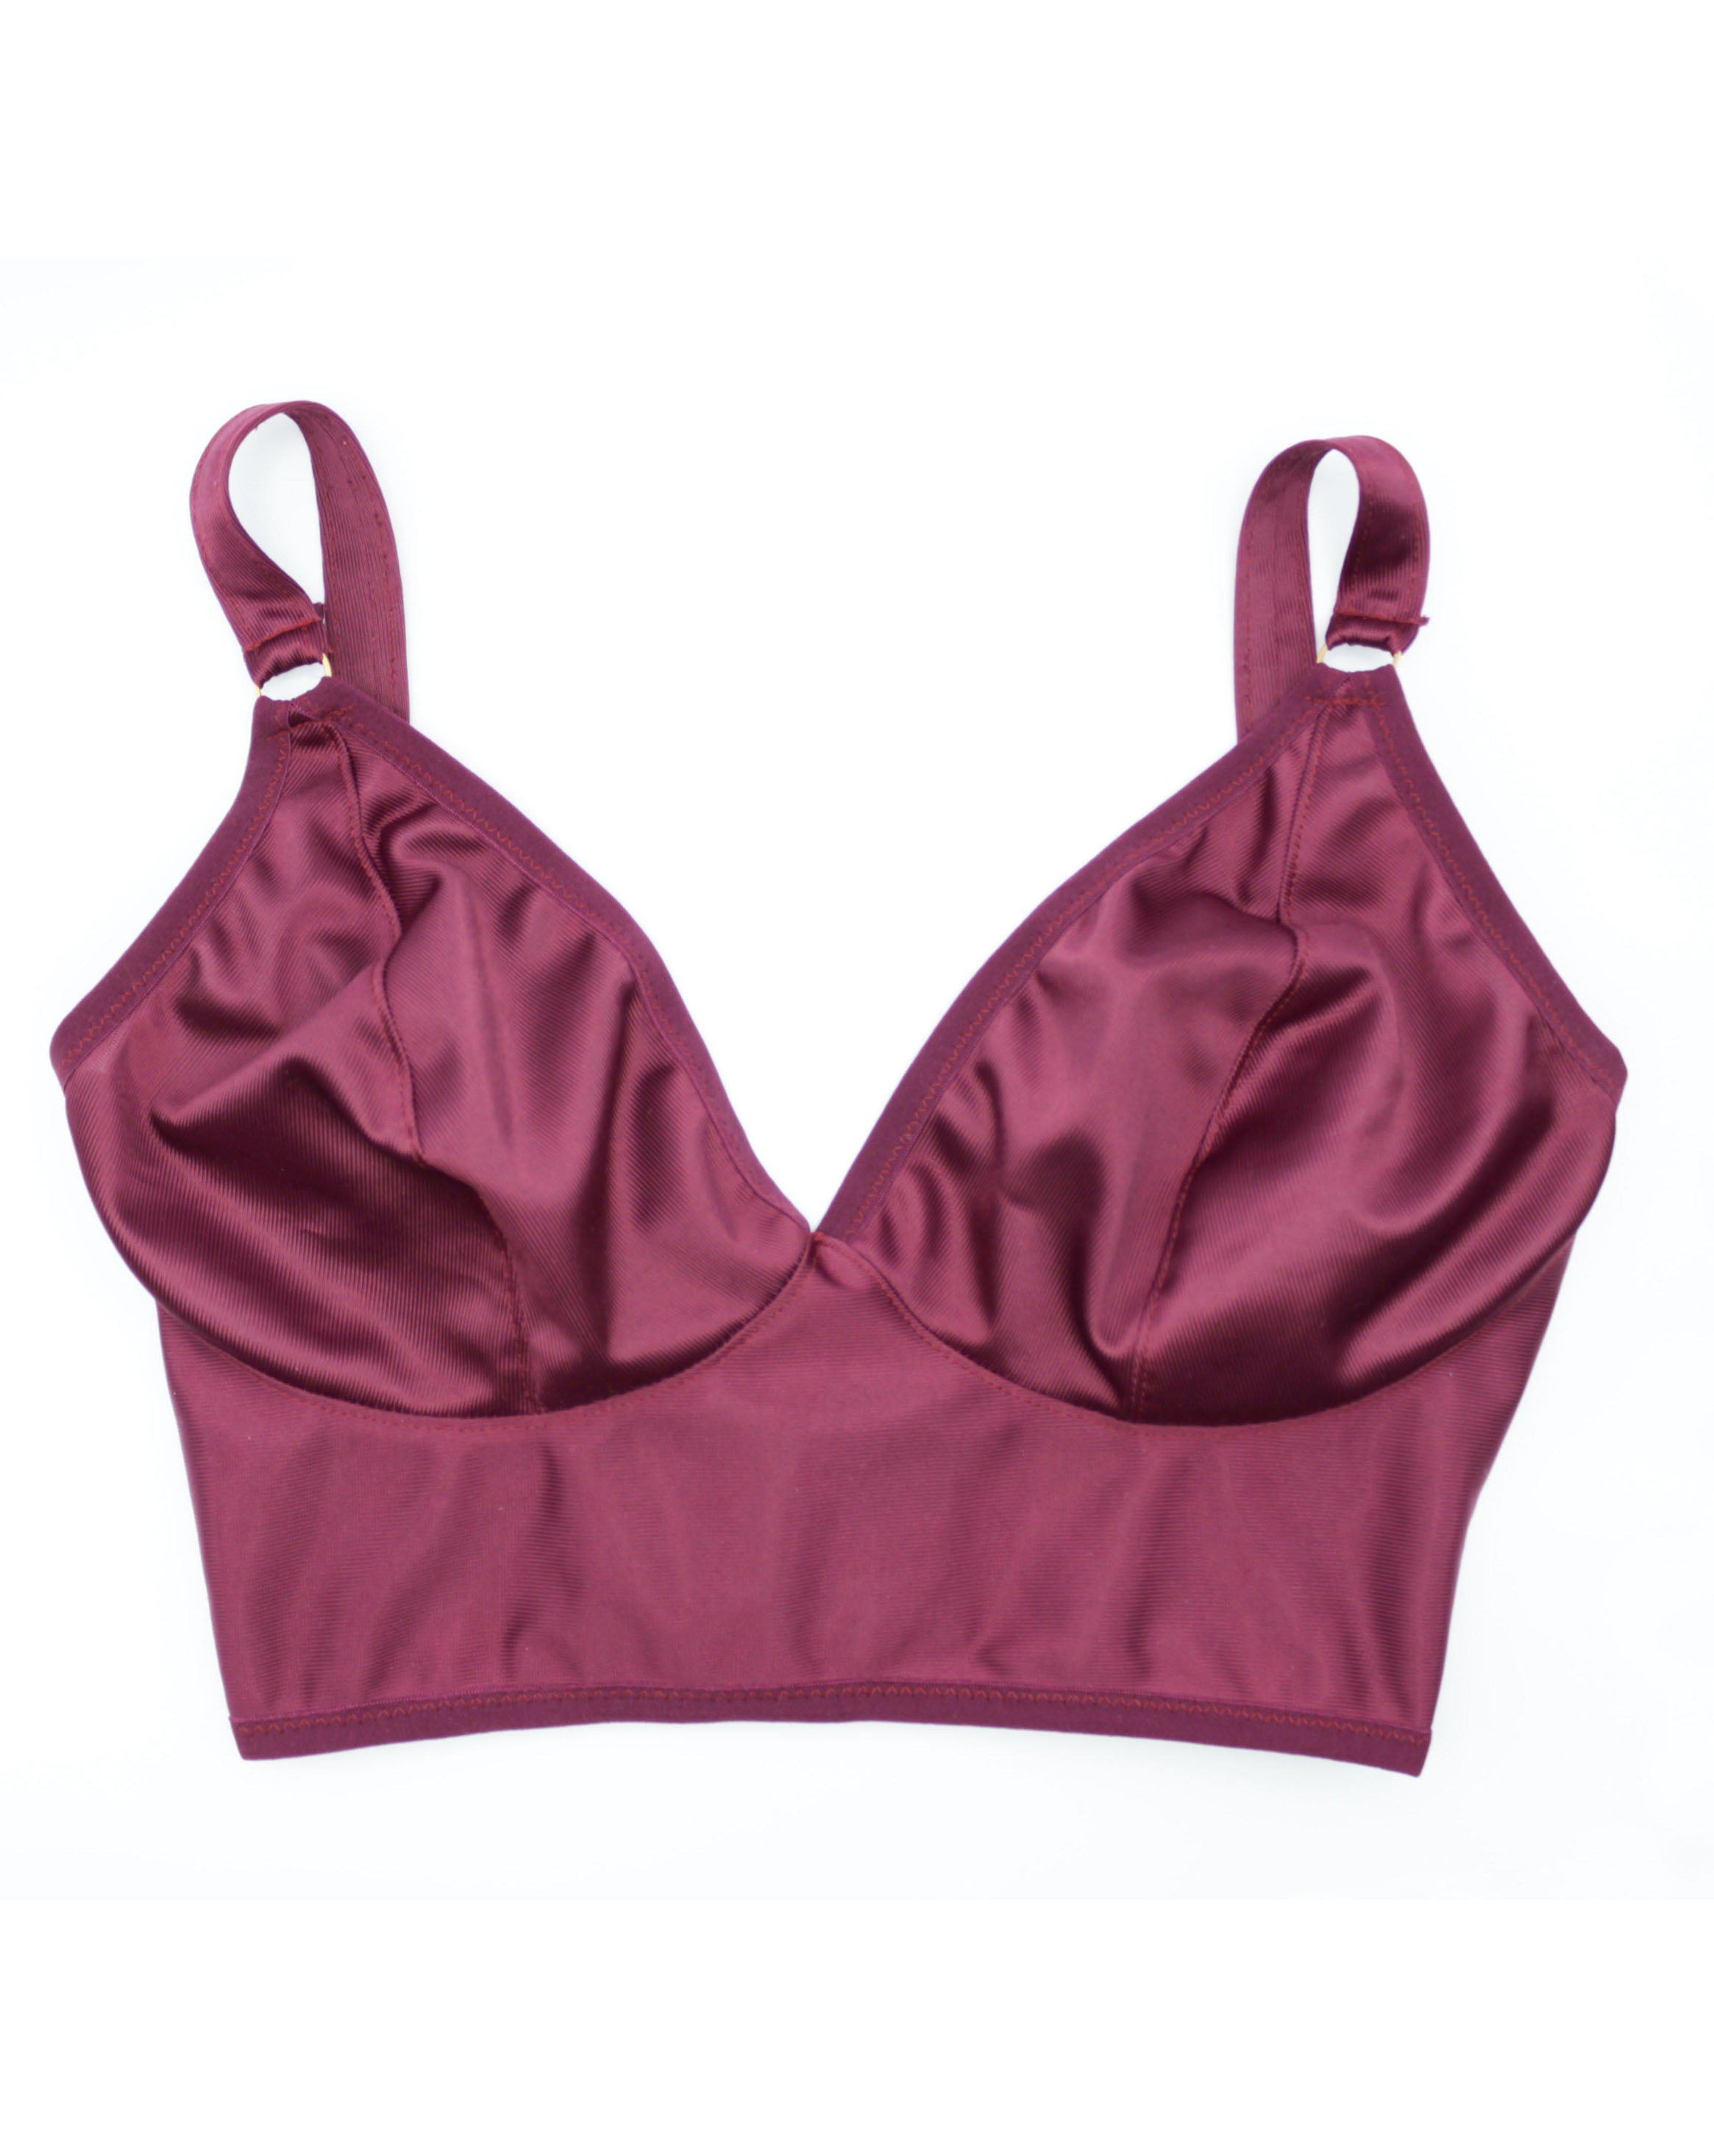 Front view of a custom made wireless bra in minimal solid burgundy color/colour made to order by Rubies Bras